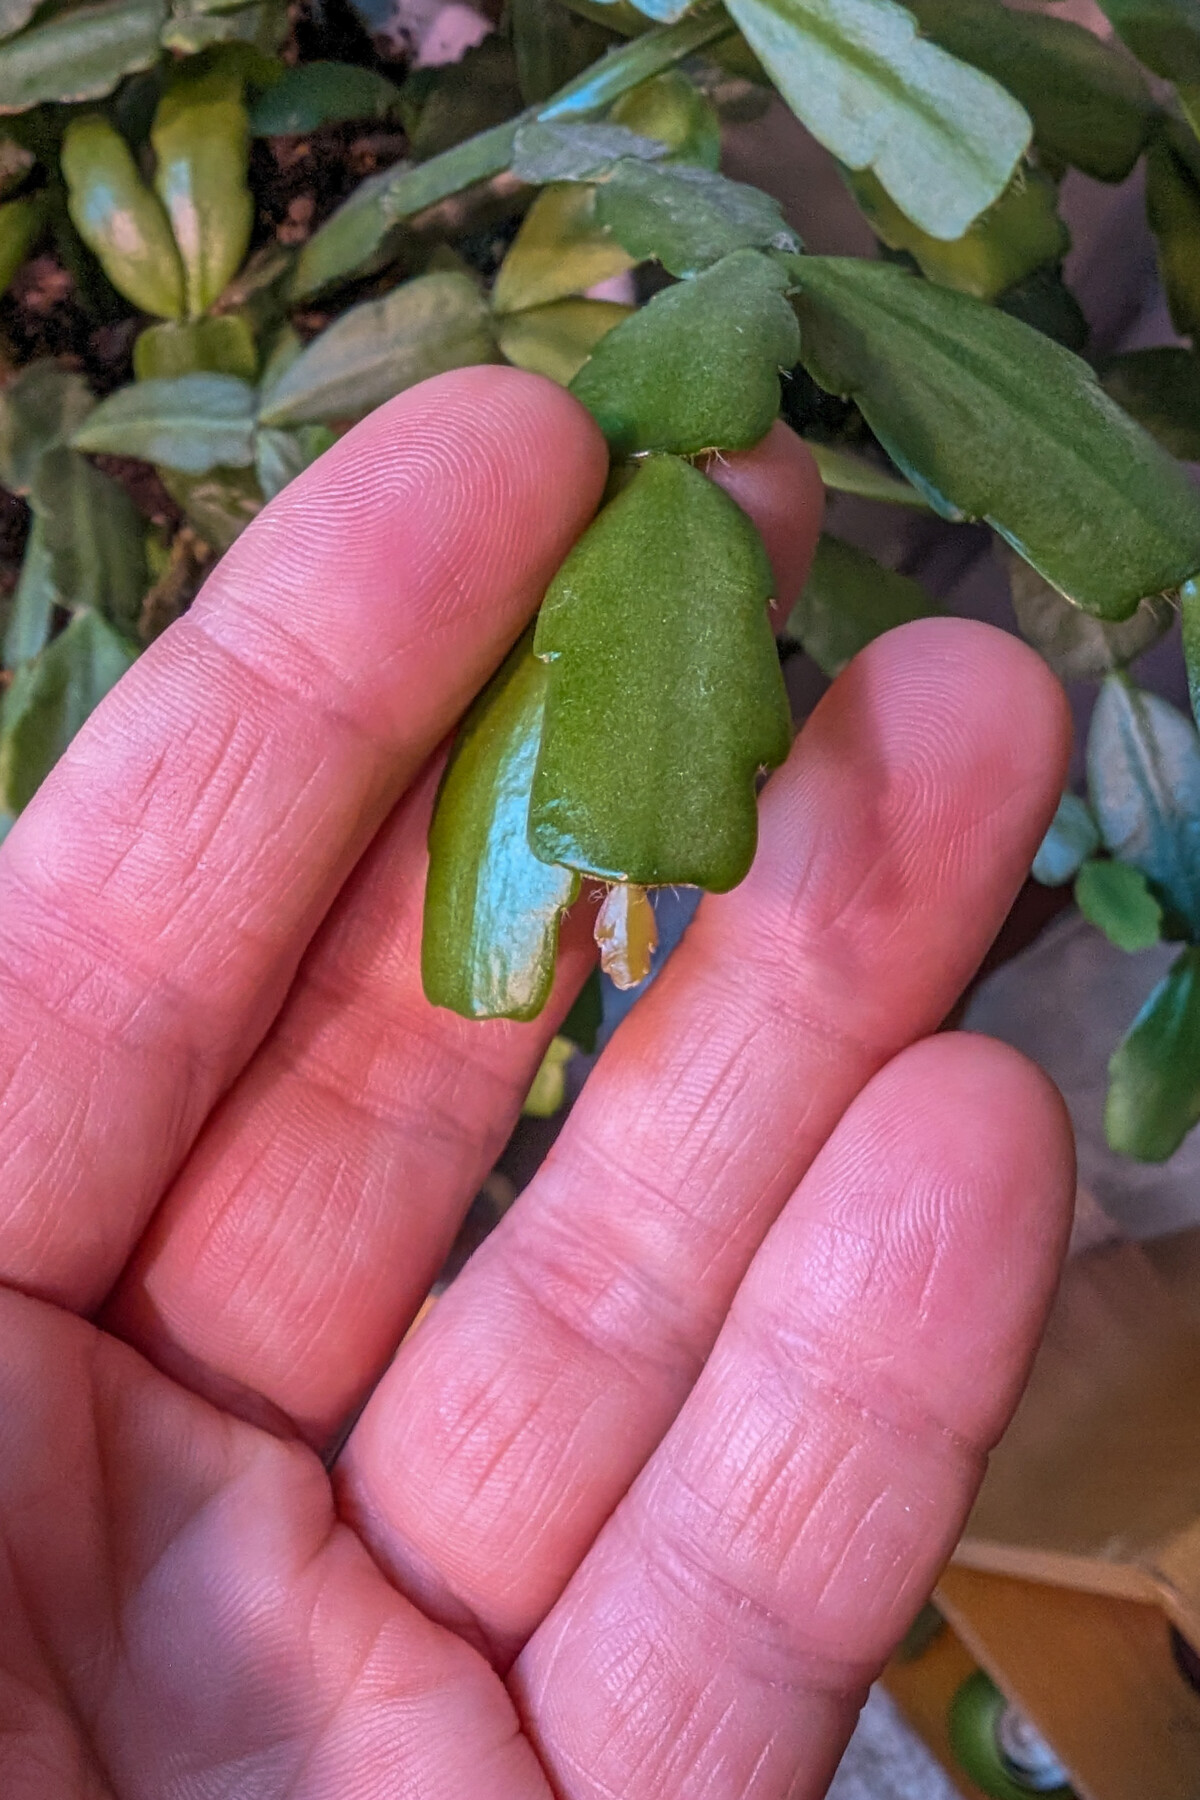 Close up of a woman's hand showing a new cladode growing on a Christmas cactus